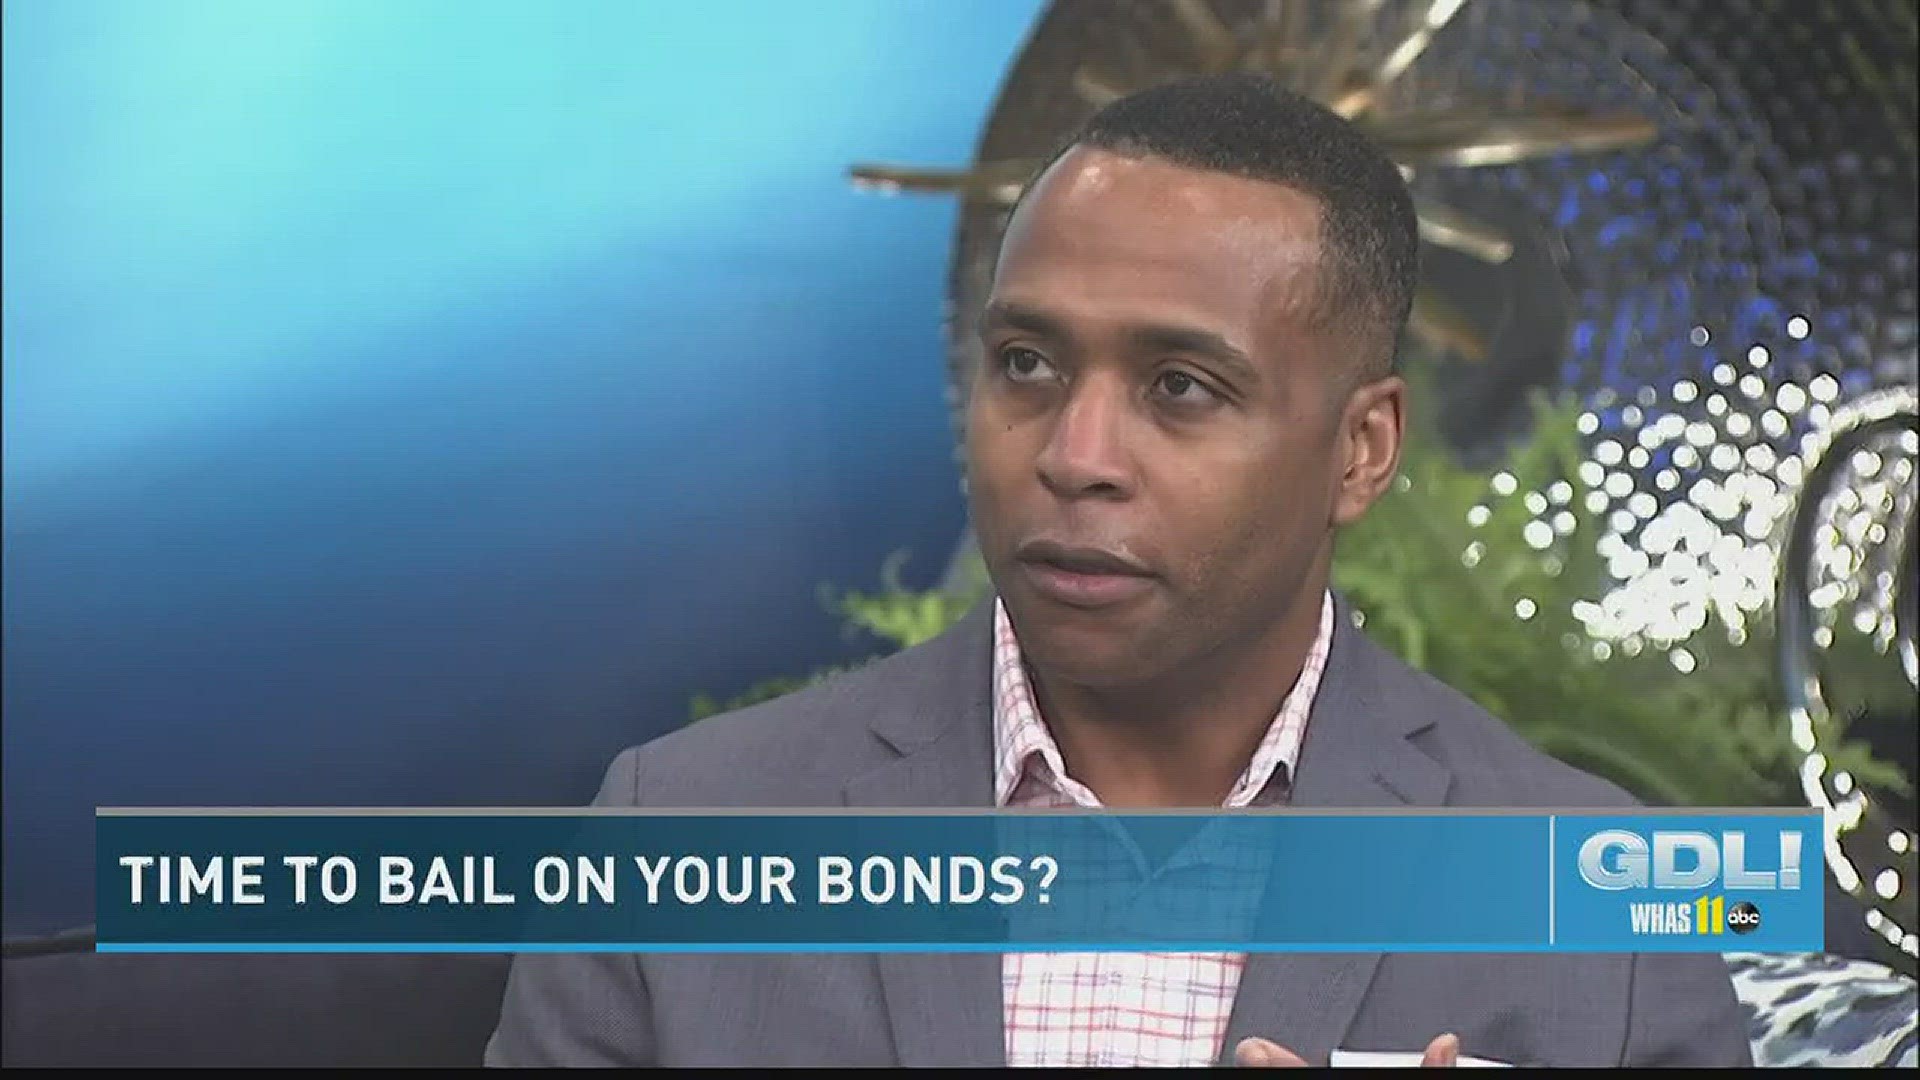 Savings bonds have been known to be "safe" investments but how safe are they? Marcus Warren and Jon Hicks share explain it may be time to bail on these bonds.